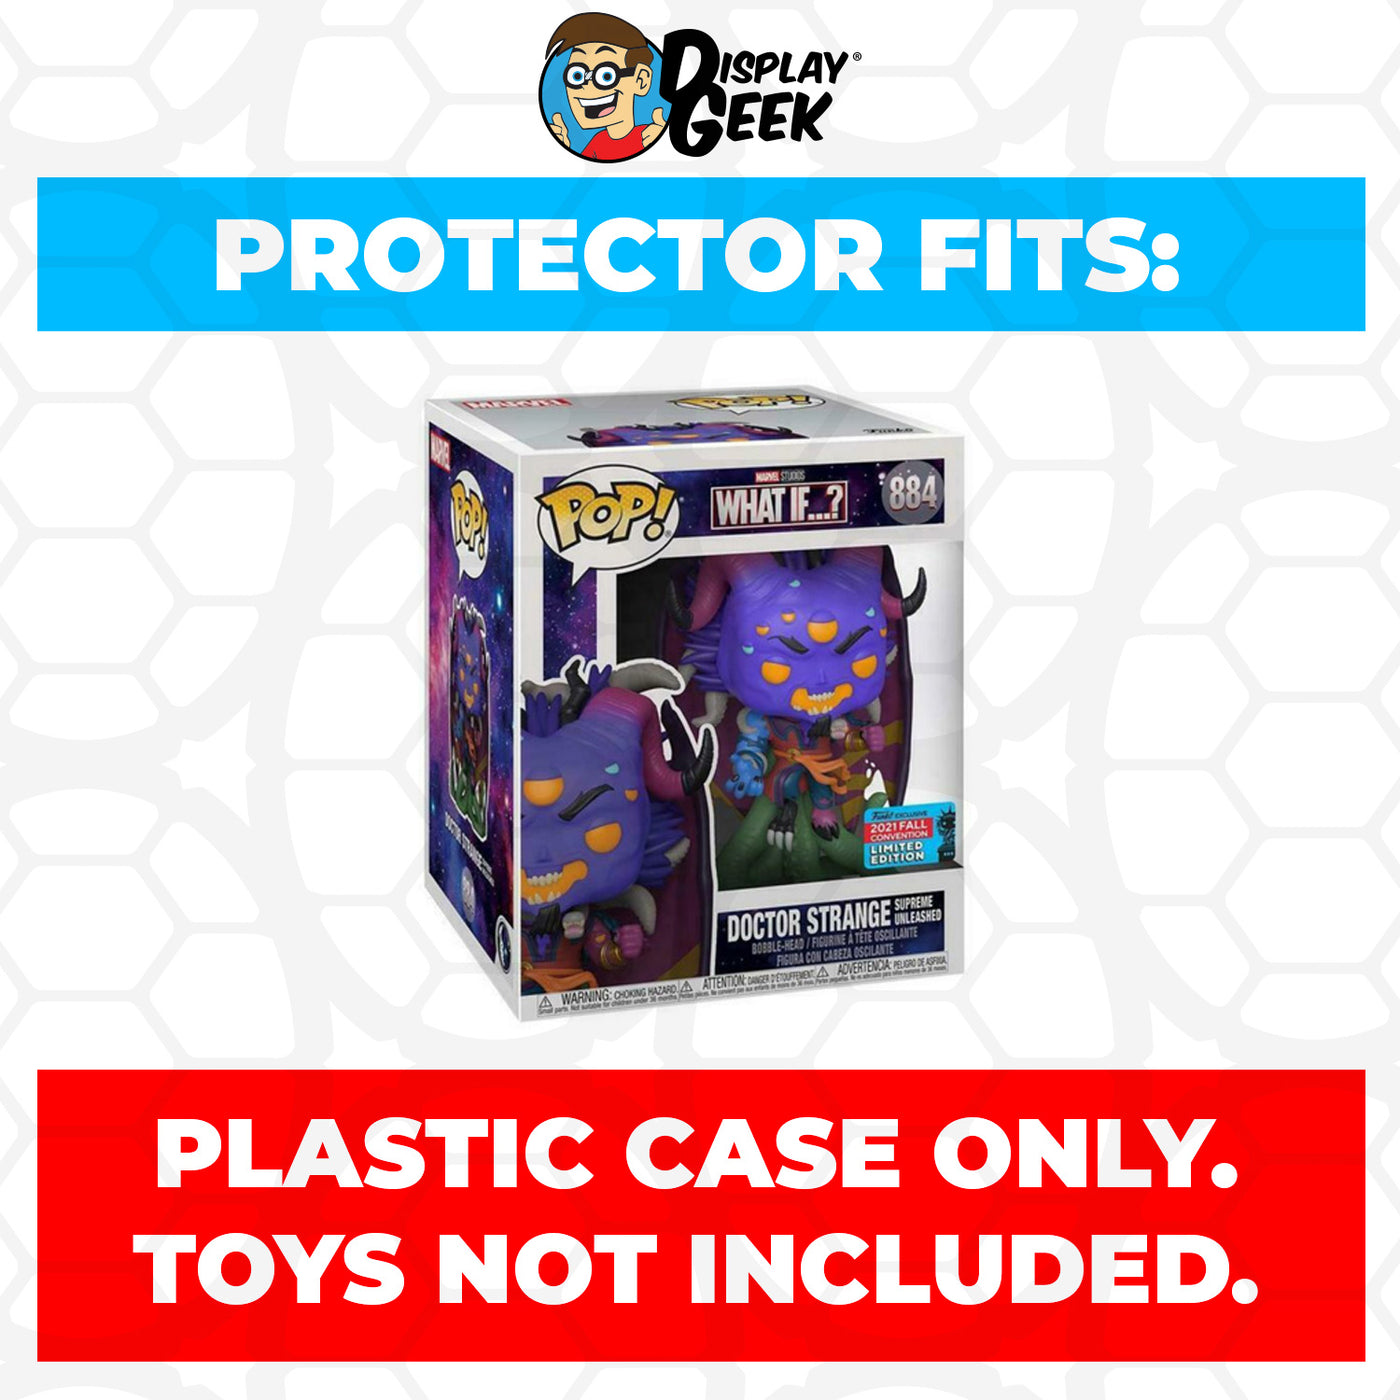 Pop Protector for 6 inch Dr Strange Supreme Unleashed NYCC #884 Super Funko Pop on The Protector Guide App by Display Geek